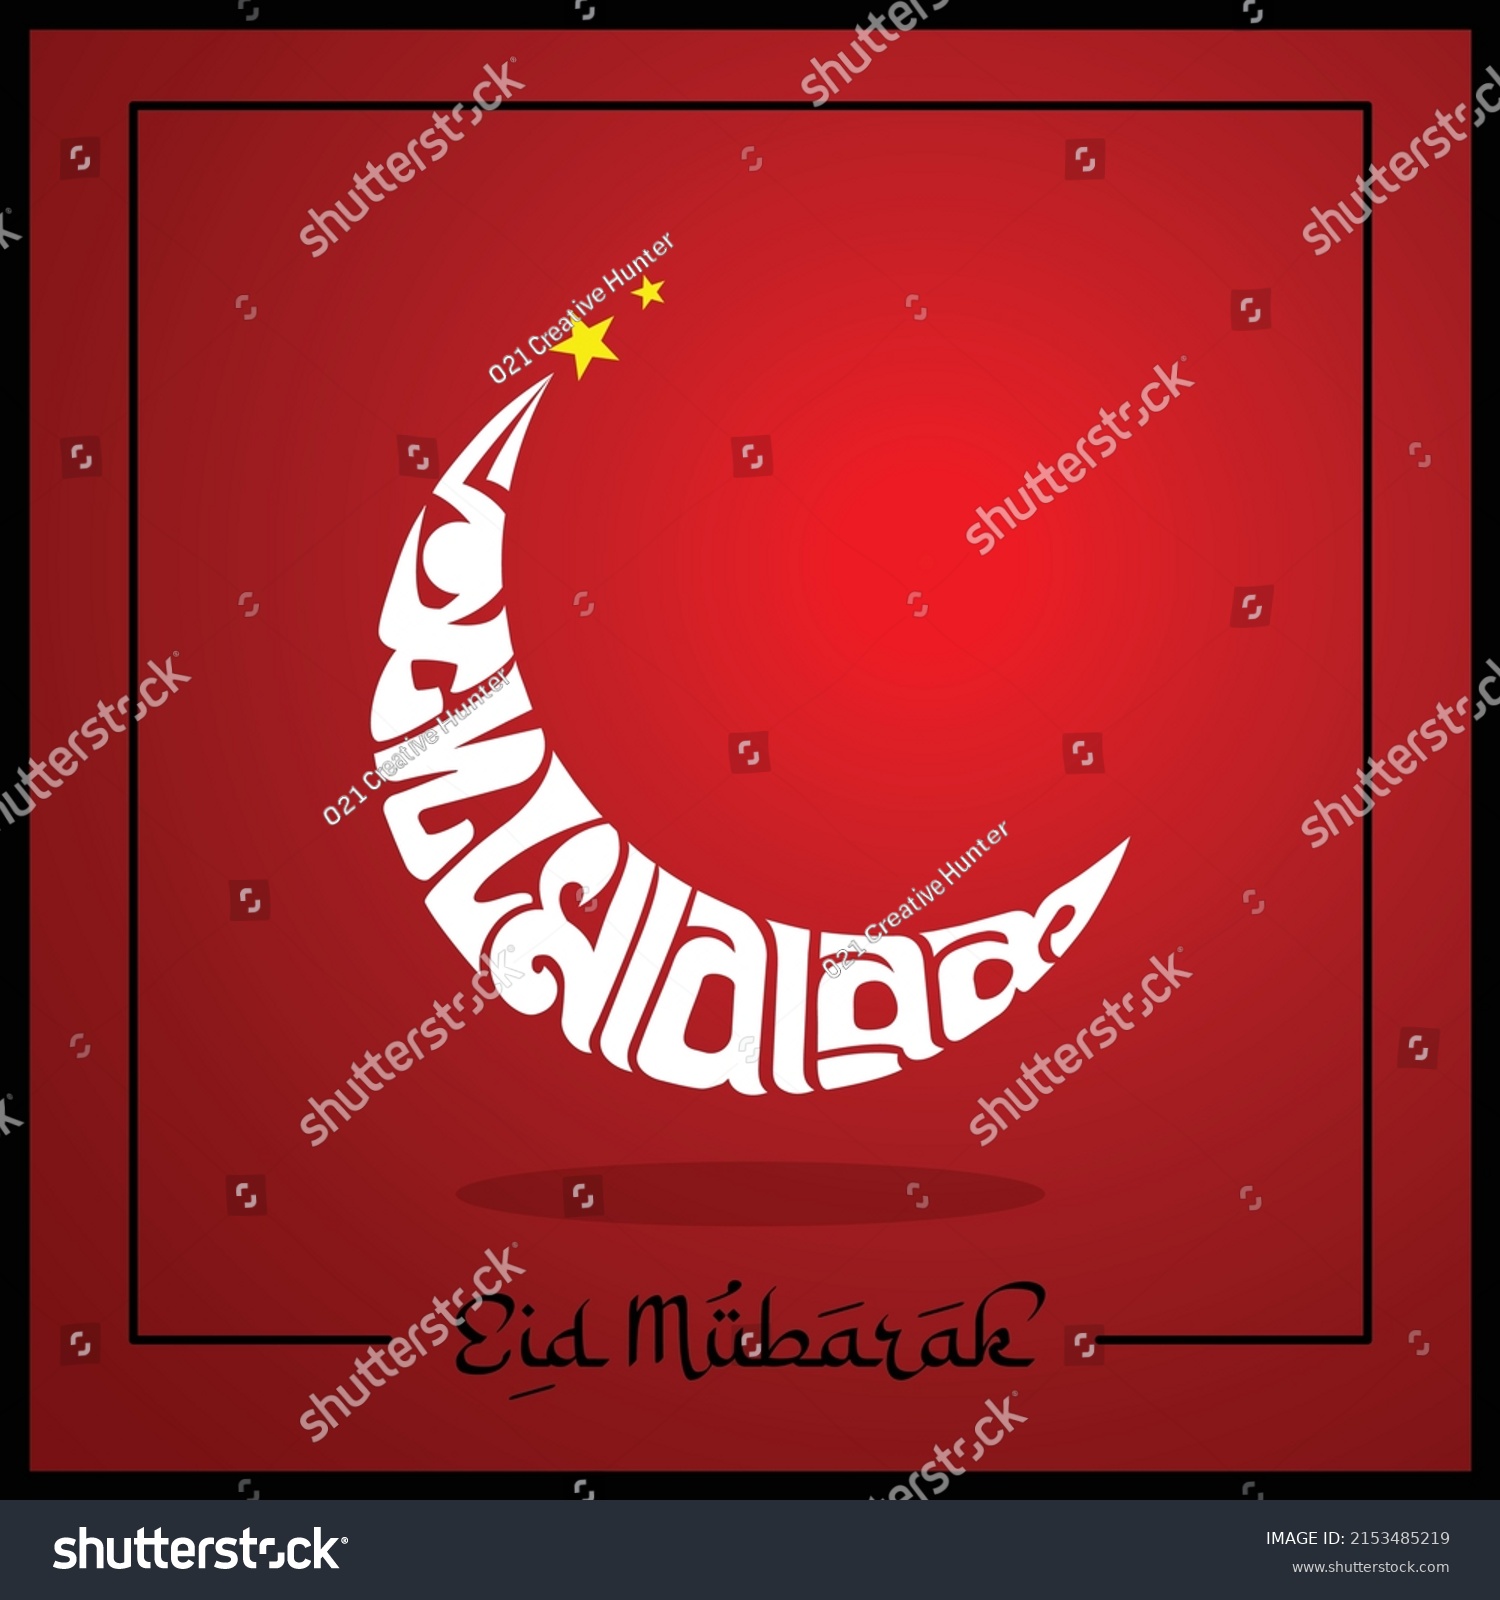 SVG of Eid Mubarak Arabic style Bangla Typography and Calligraphy with making moon shape design. Eid Ul-Fitr, Eid Ul-Adha. Religious holidays are celebrated by Muslims worldwide. Creative Concept. Vector svg